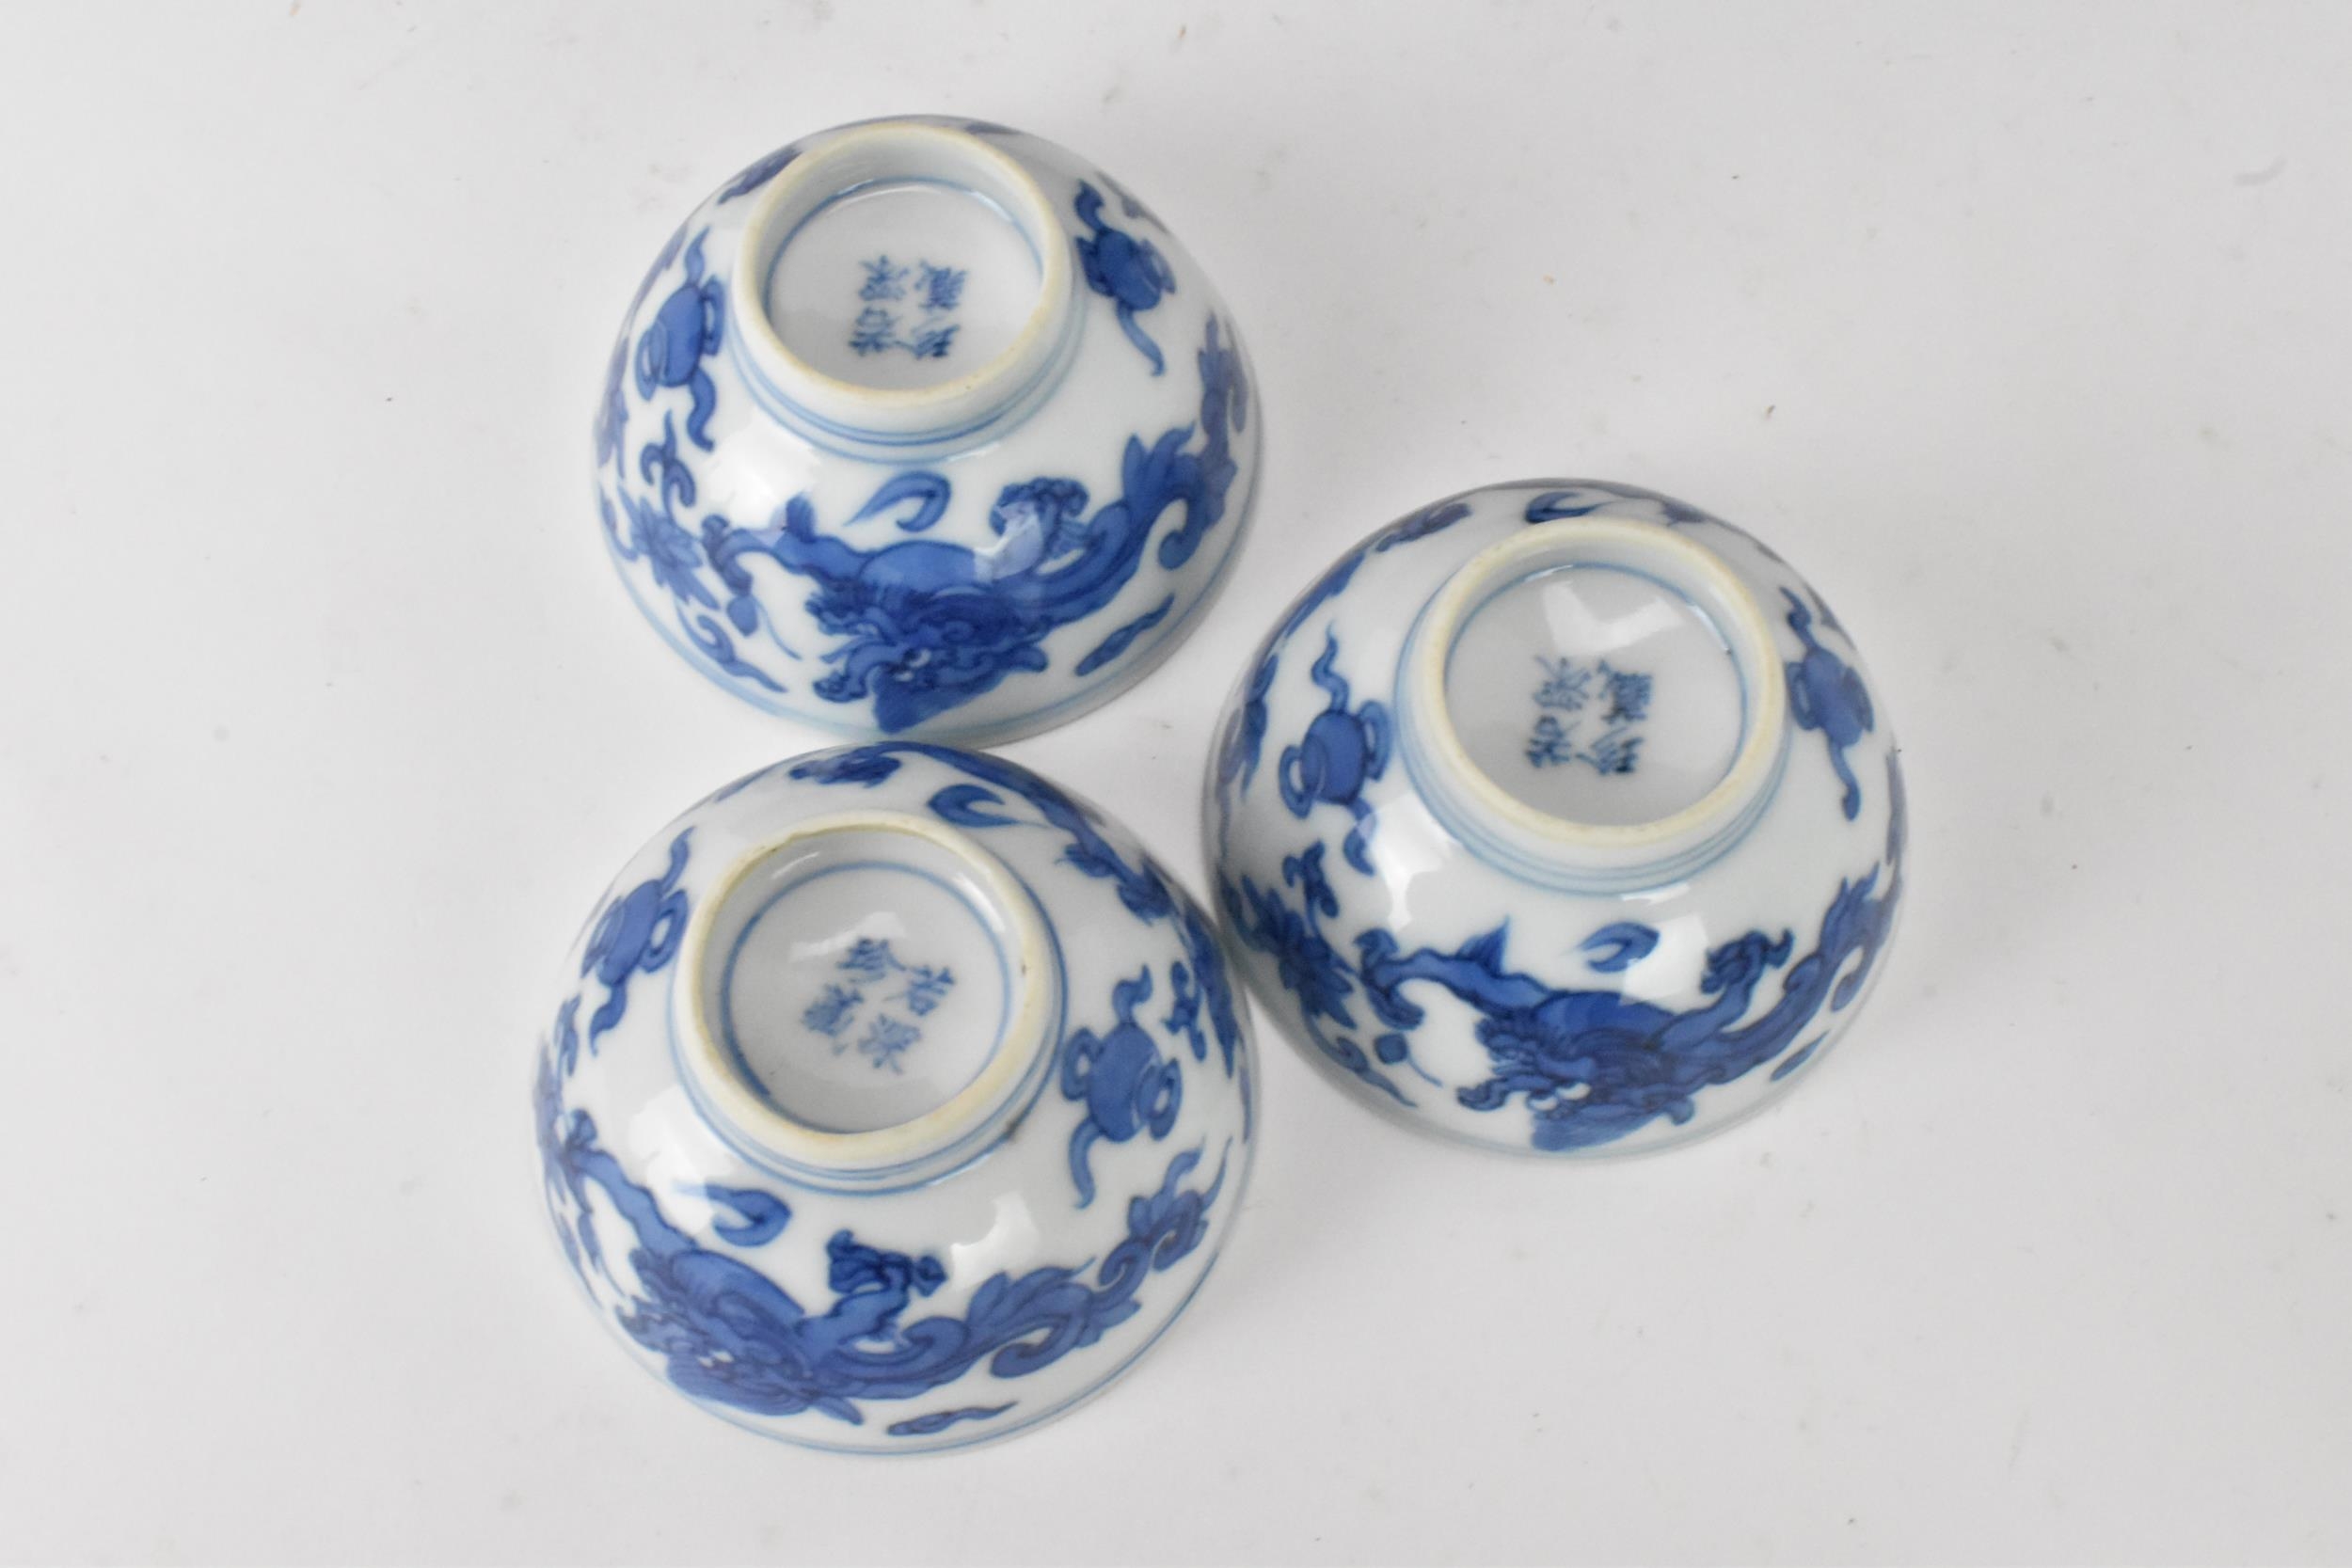 Three Chinese 20th century blue and white bowls, decorated with dragons and interiors with central - Image 5 of 9